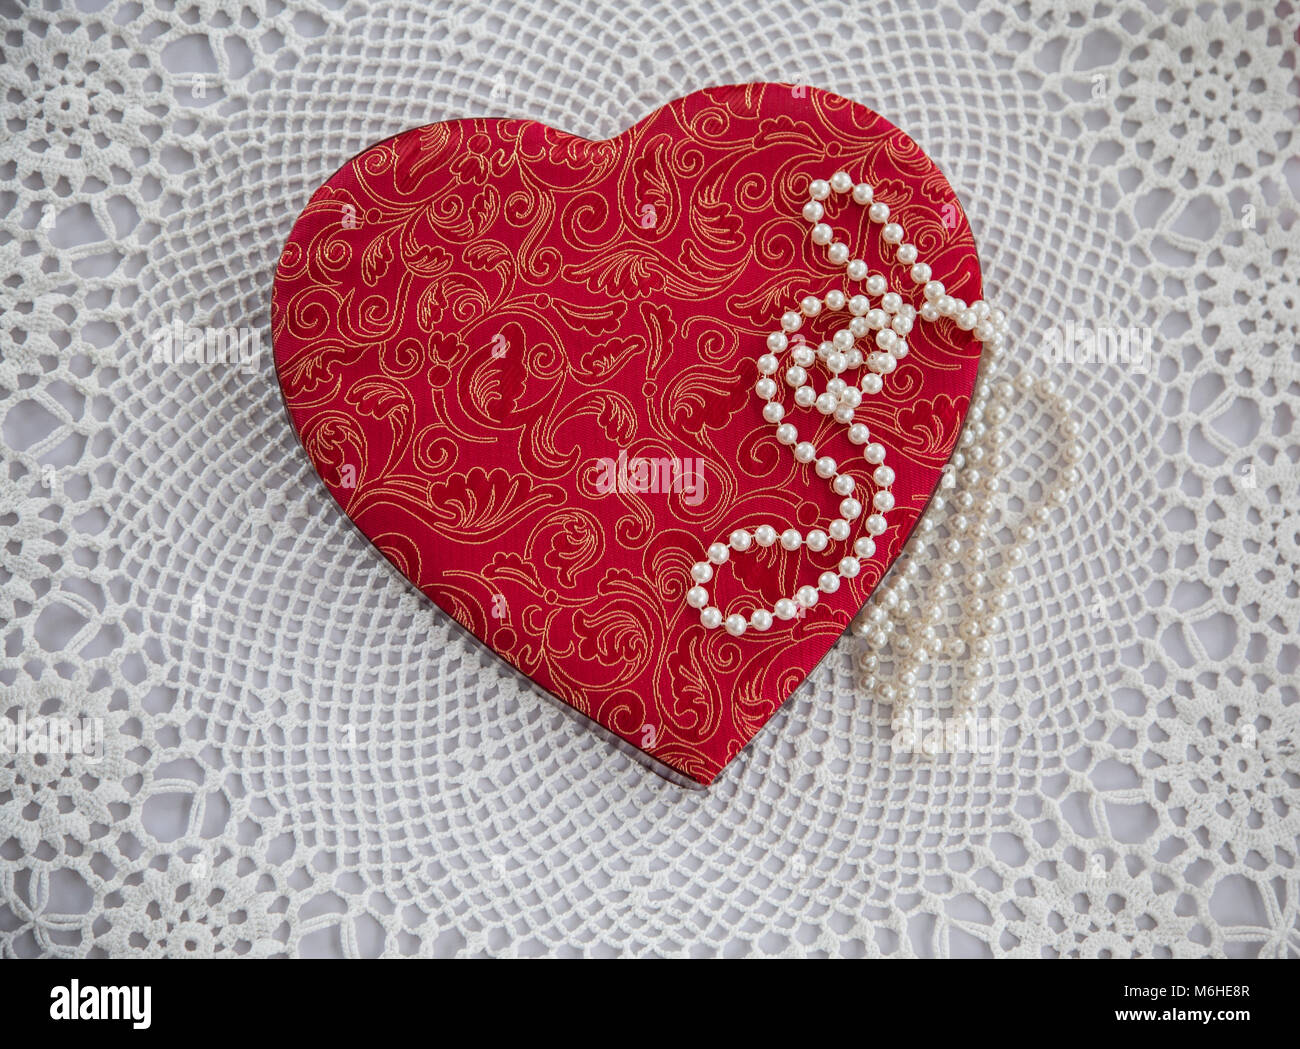 Vintage red fabric Saint Valentine candy box heart against a white doily and pearls, USa, lace Victorian abstract, unconventional Victorian Valentines Stock Photo